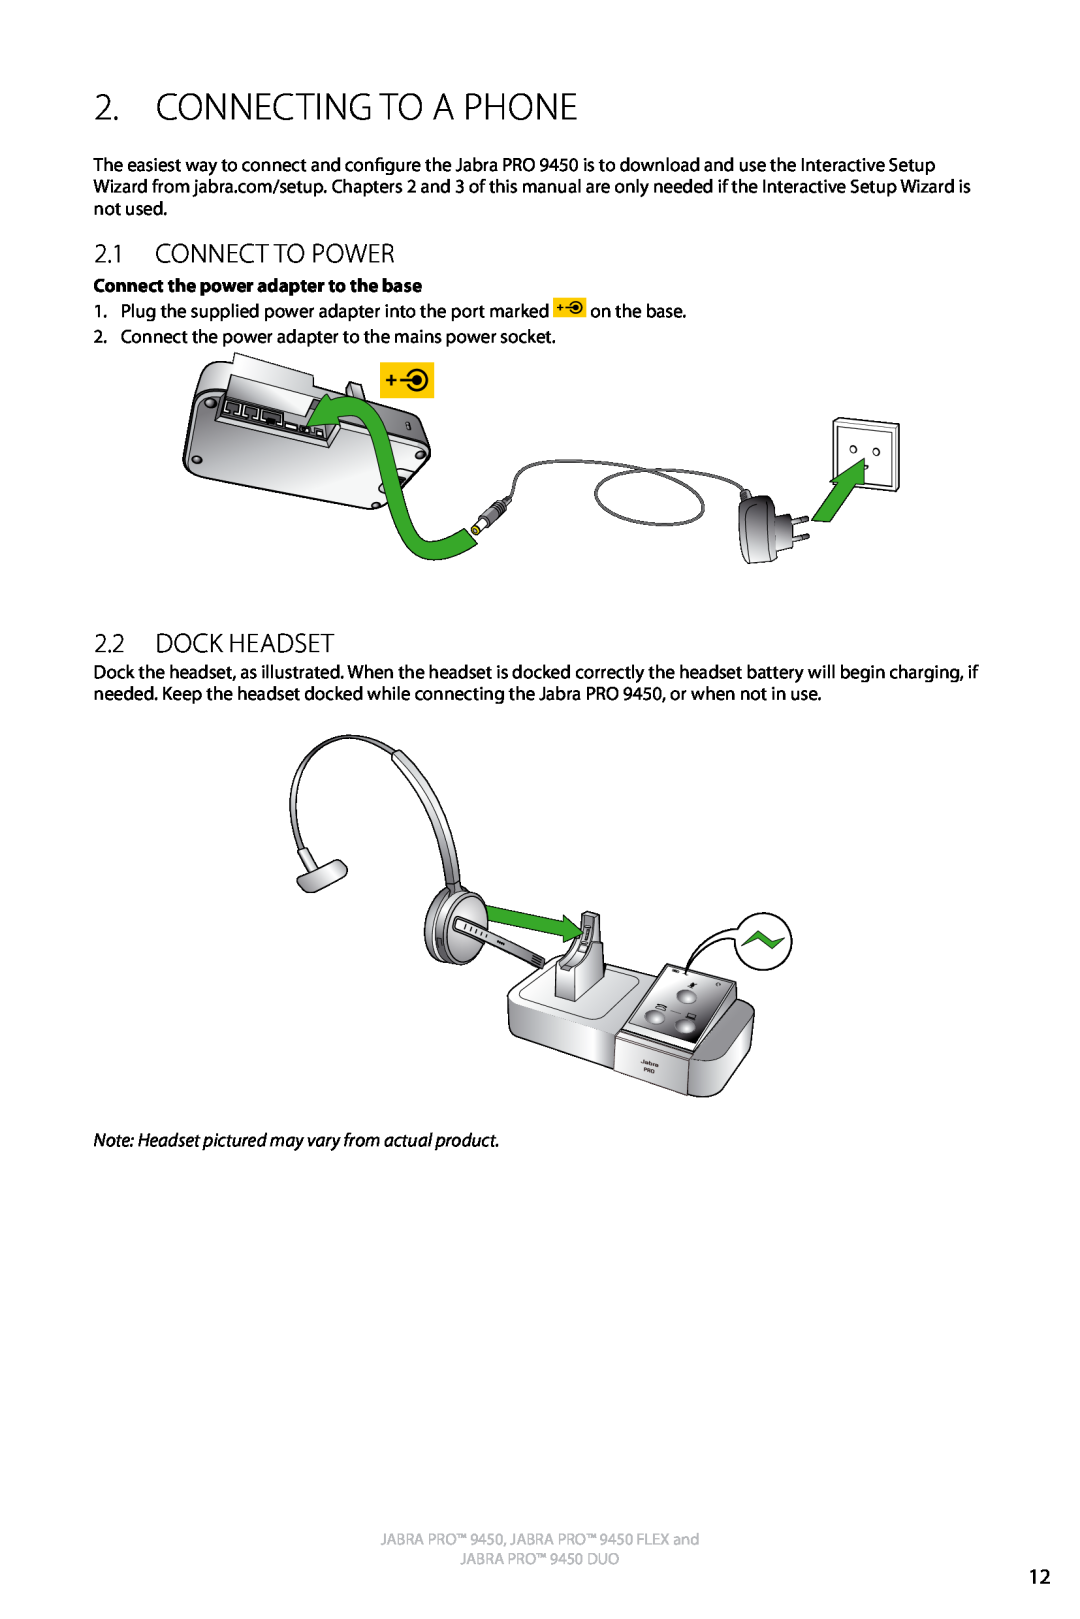 Jabra 9450 user manual CONNECTING to a phone, Connect to Power, Dock Headset, Connect the power adapter to the base 